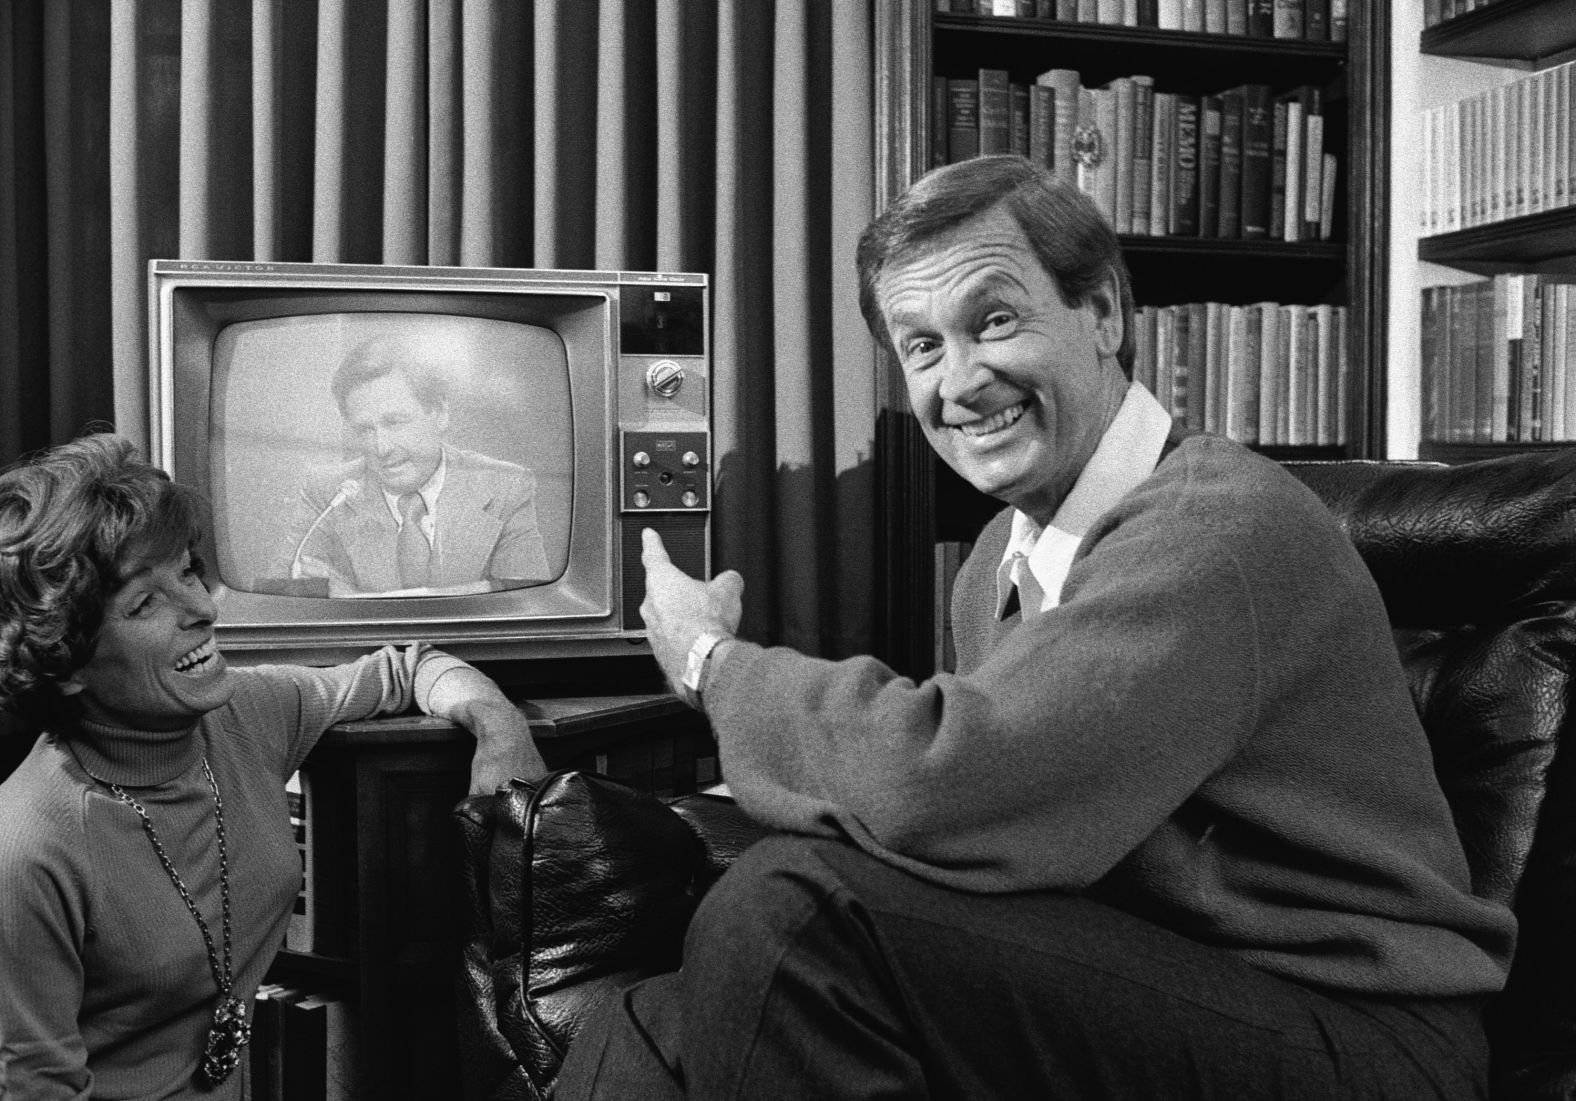 Barker points to himself on television as his wife looks on and laughs in this 1977 photo. Dorothy Jo died from lung cancer in 1981.